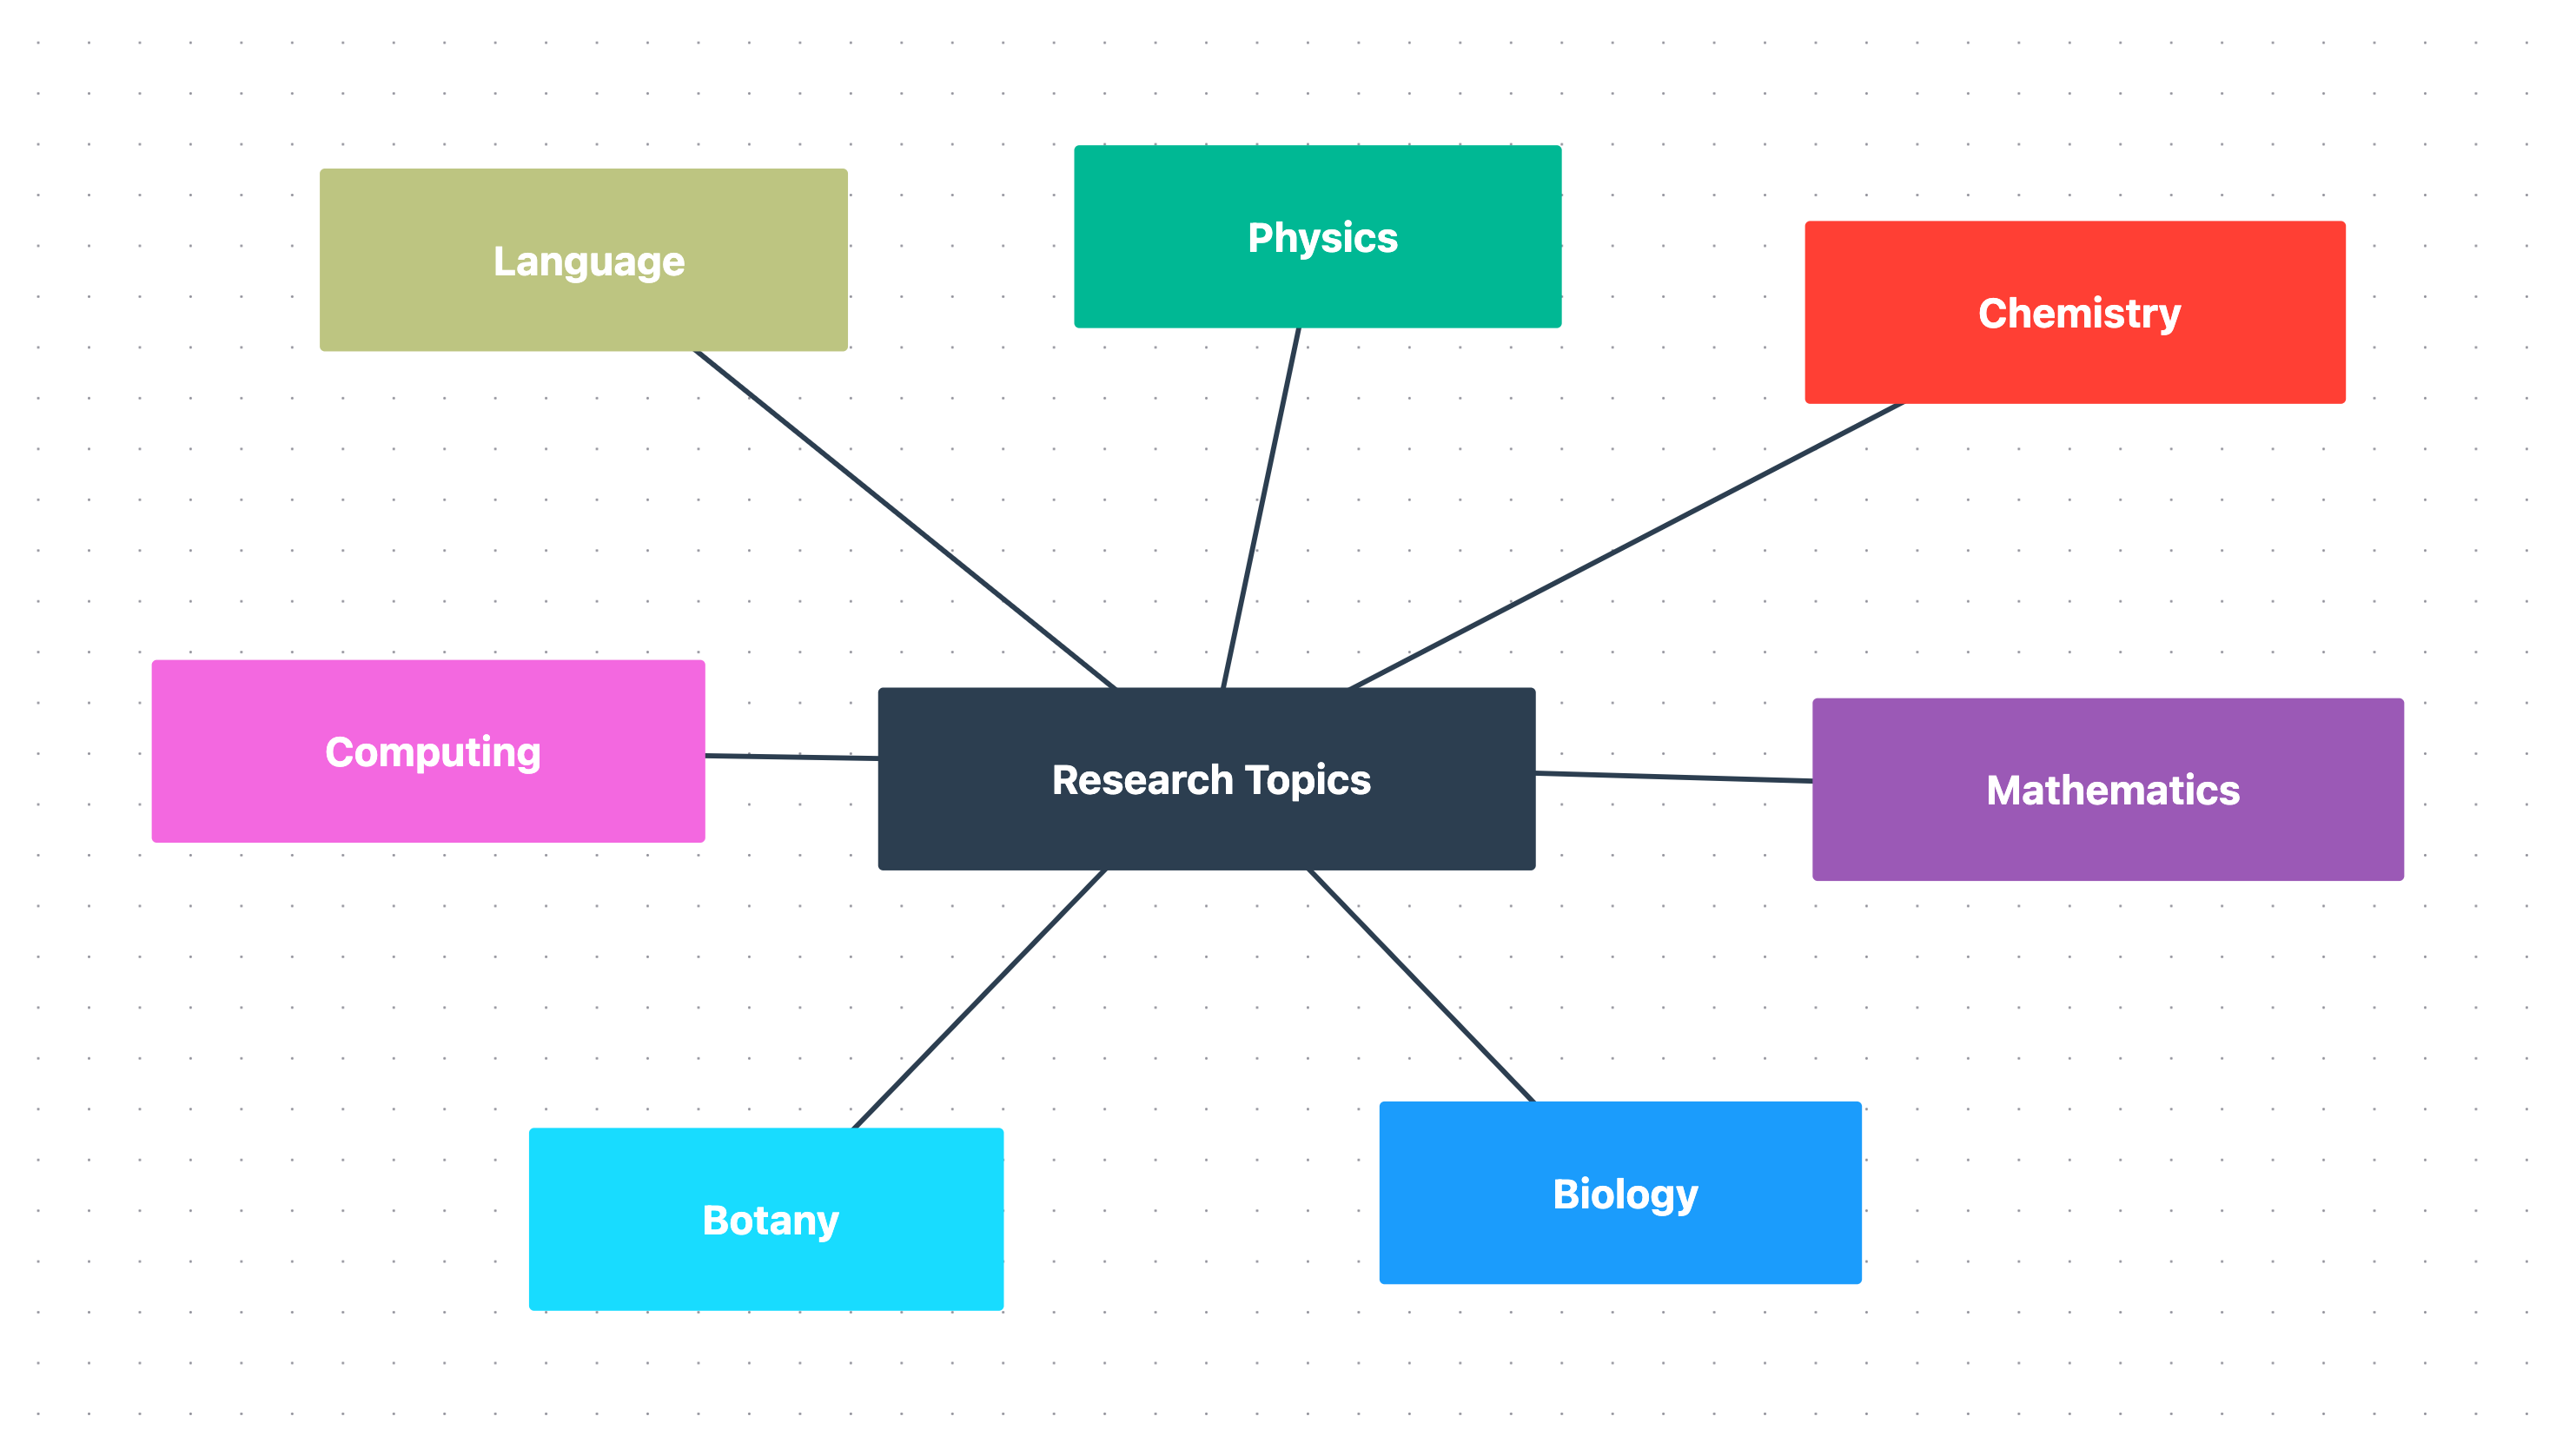 Example of a simple thought map showing different ideas for research topics